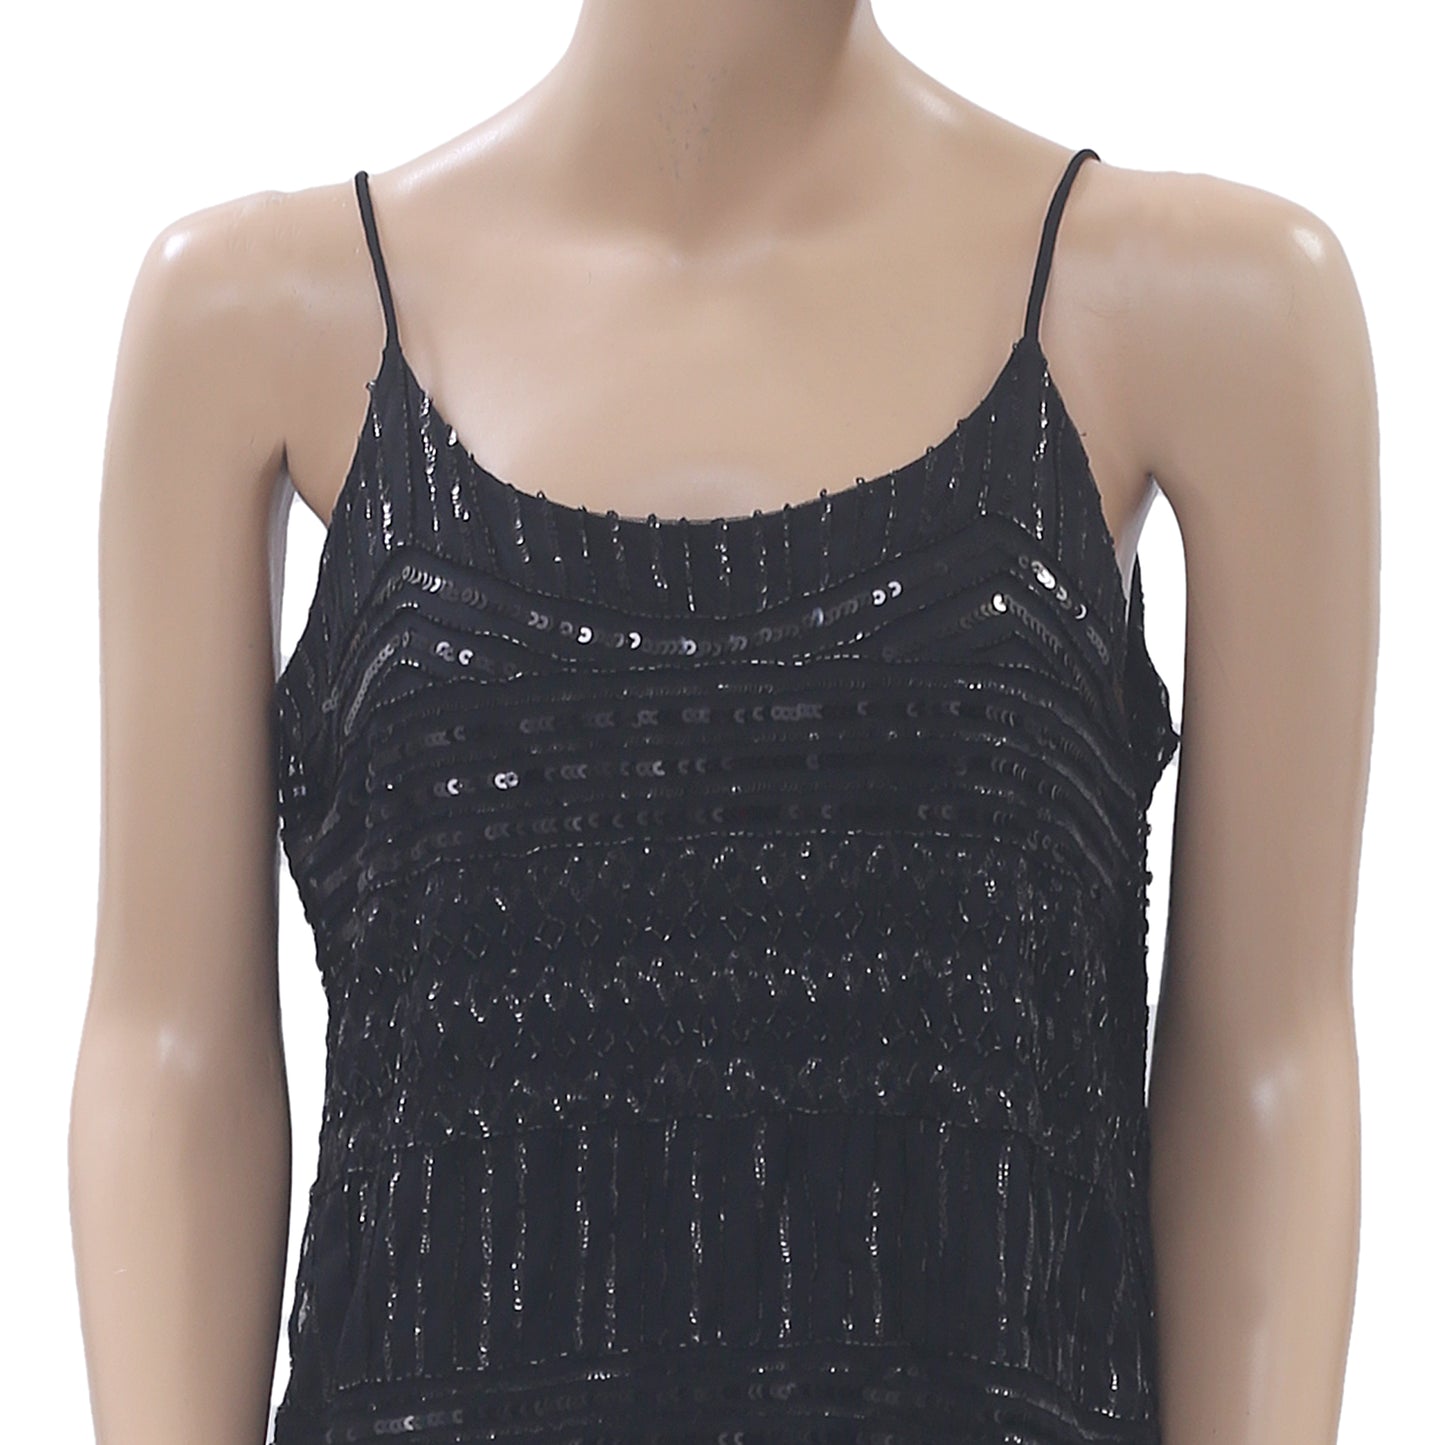 Asos Bead & Sequin Embellished Camisole Blouse Top